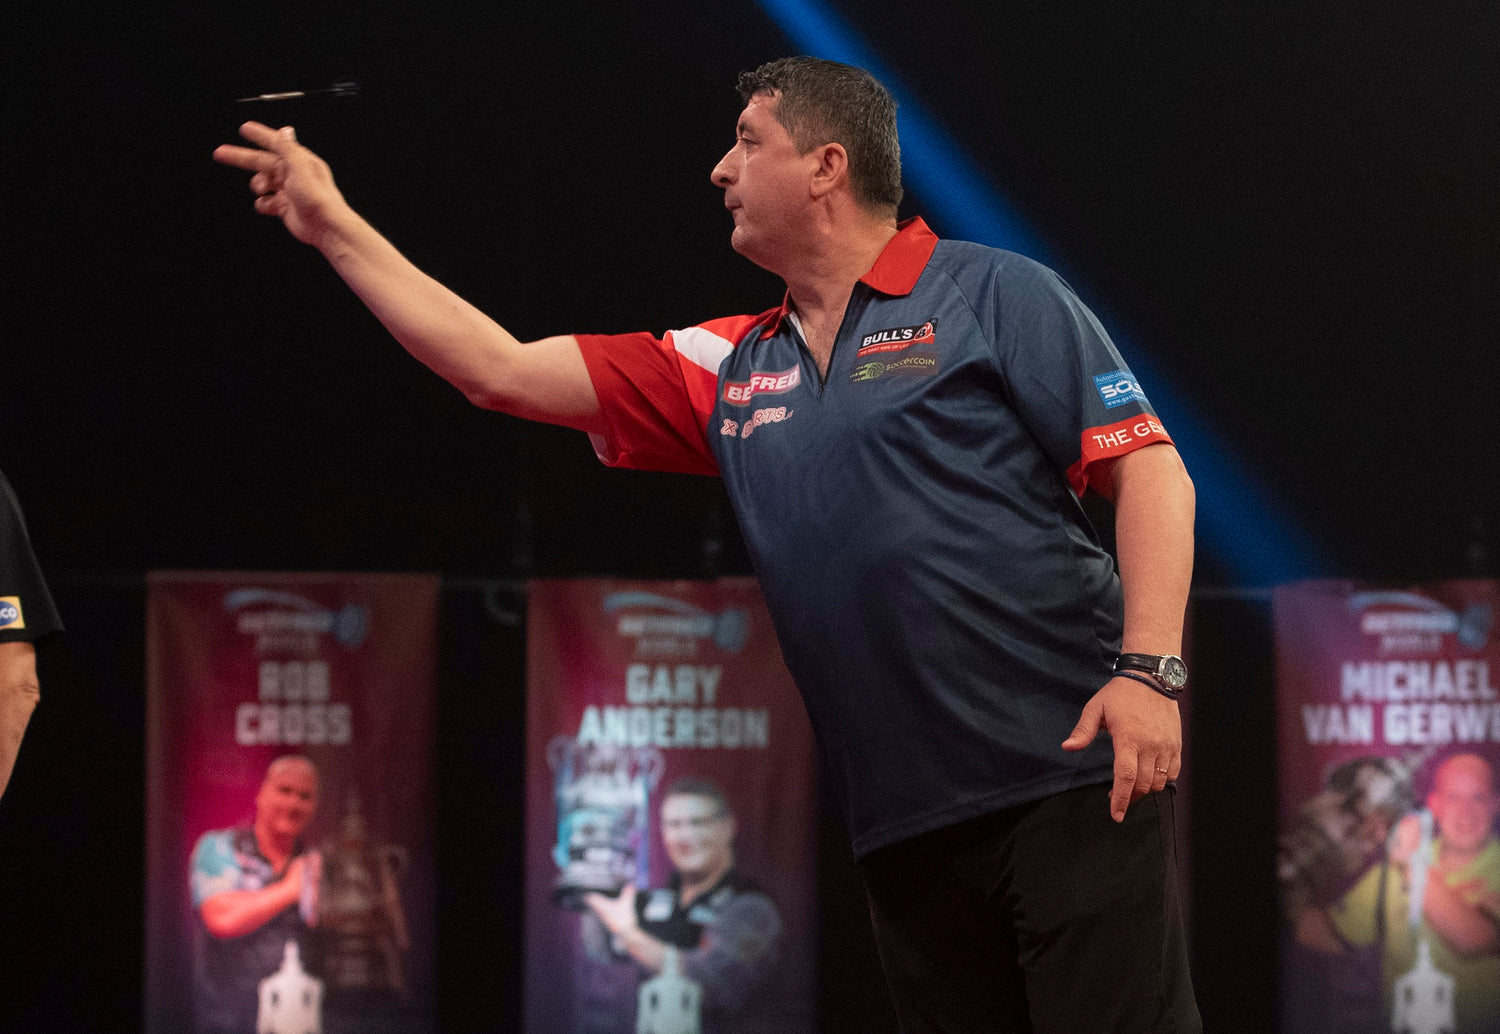 Suljovic replaced by Wattimena for Betfred World Matchplay